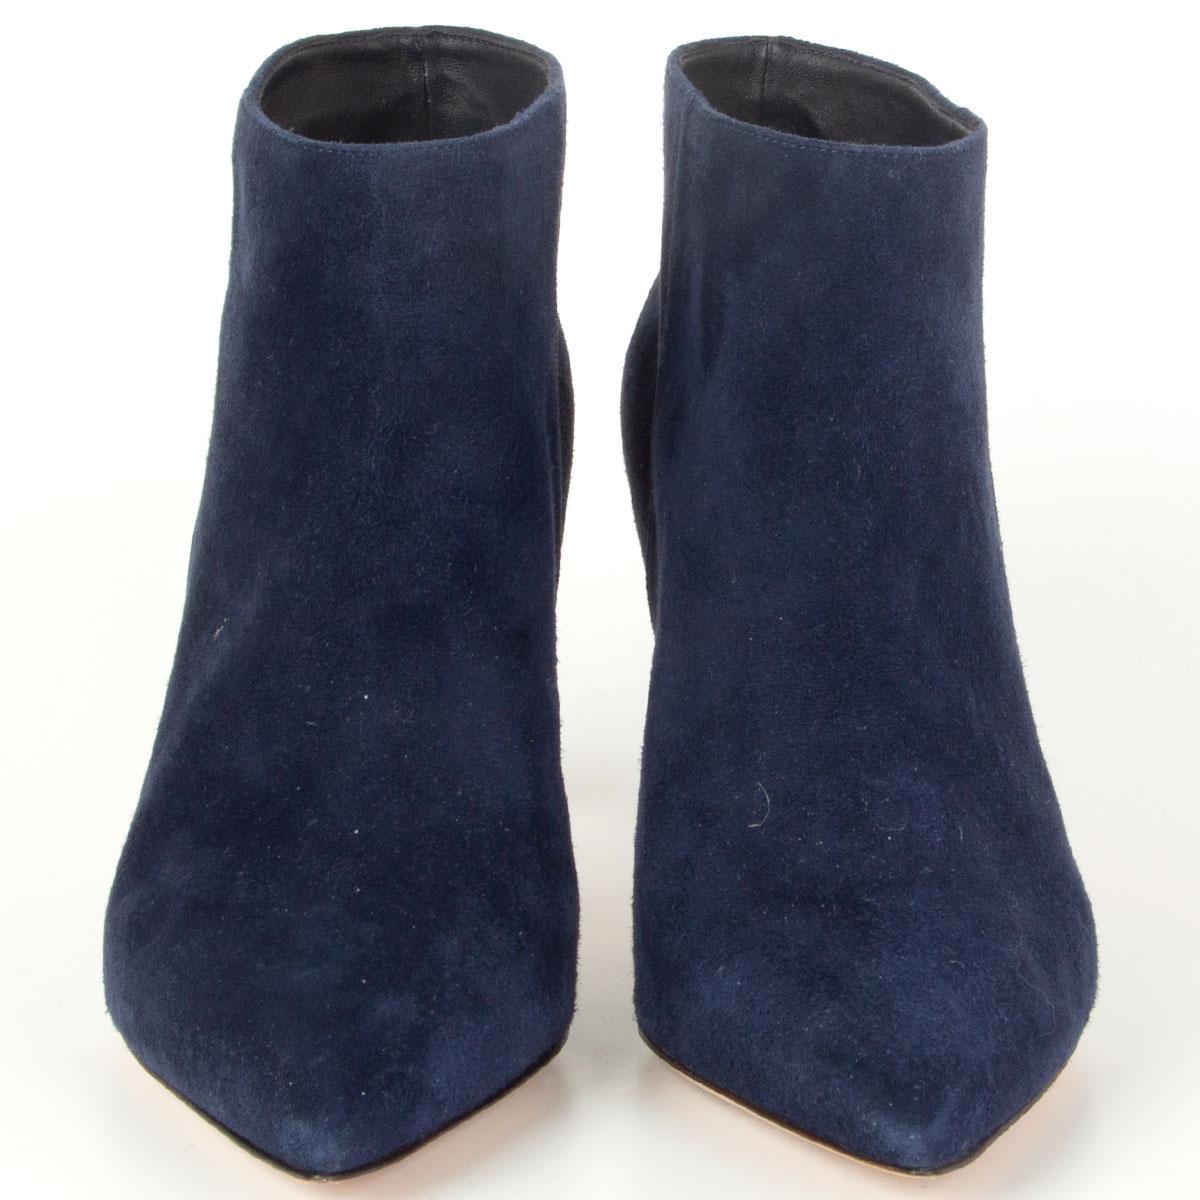 100% authentic Gianvito Rossi 'Stilo' pointed-toe ankle boots in navy blue suede. Have been worn once and are in excellent condition. 

Imprinted Size 36
Shoe Size 36
Inside Sole 23cm (9in)
Width 7cm (2.7in)
Heel 8.5cm (3.3in)
